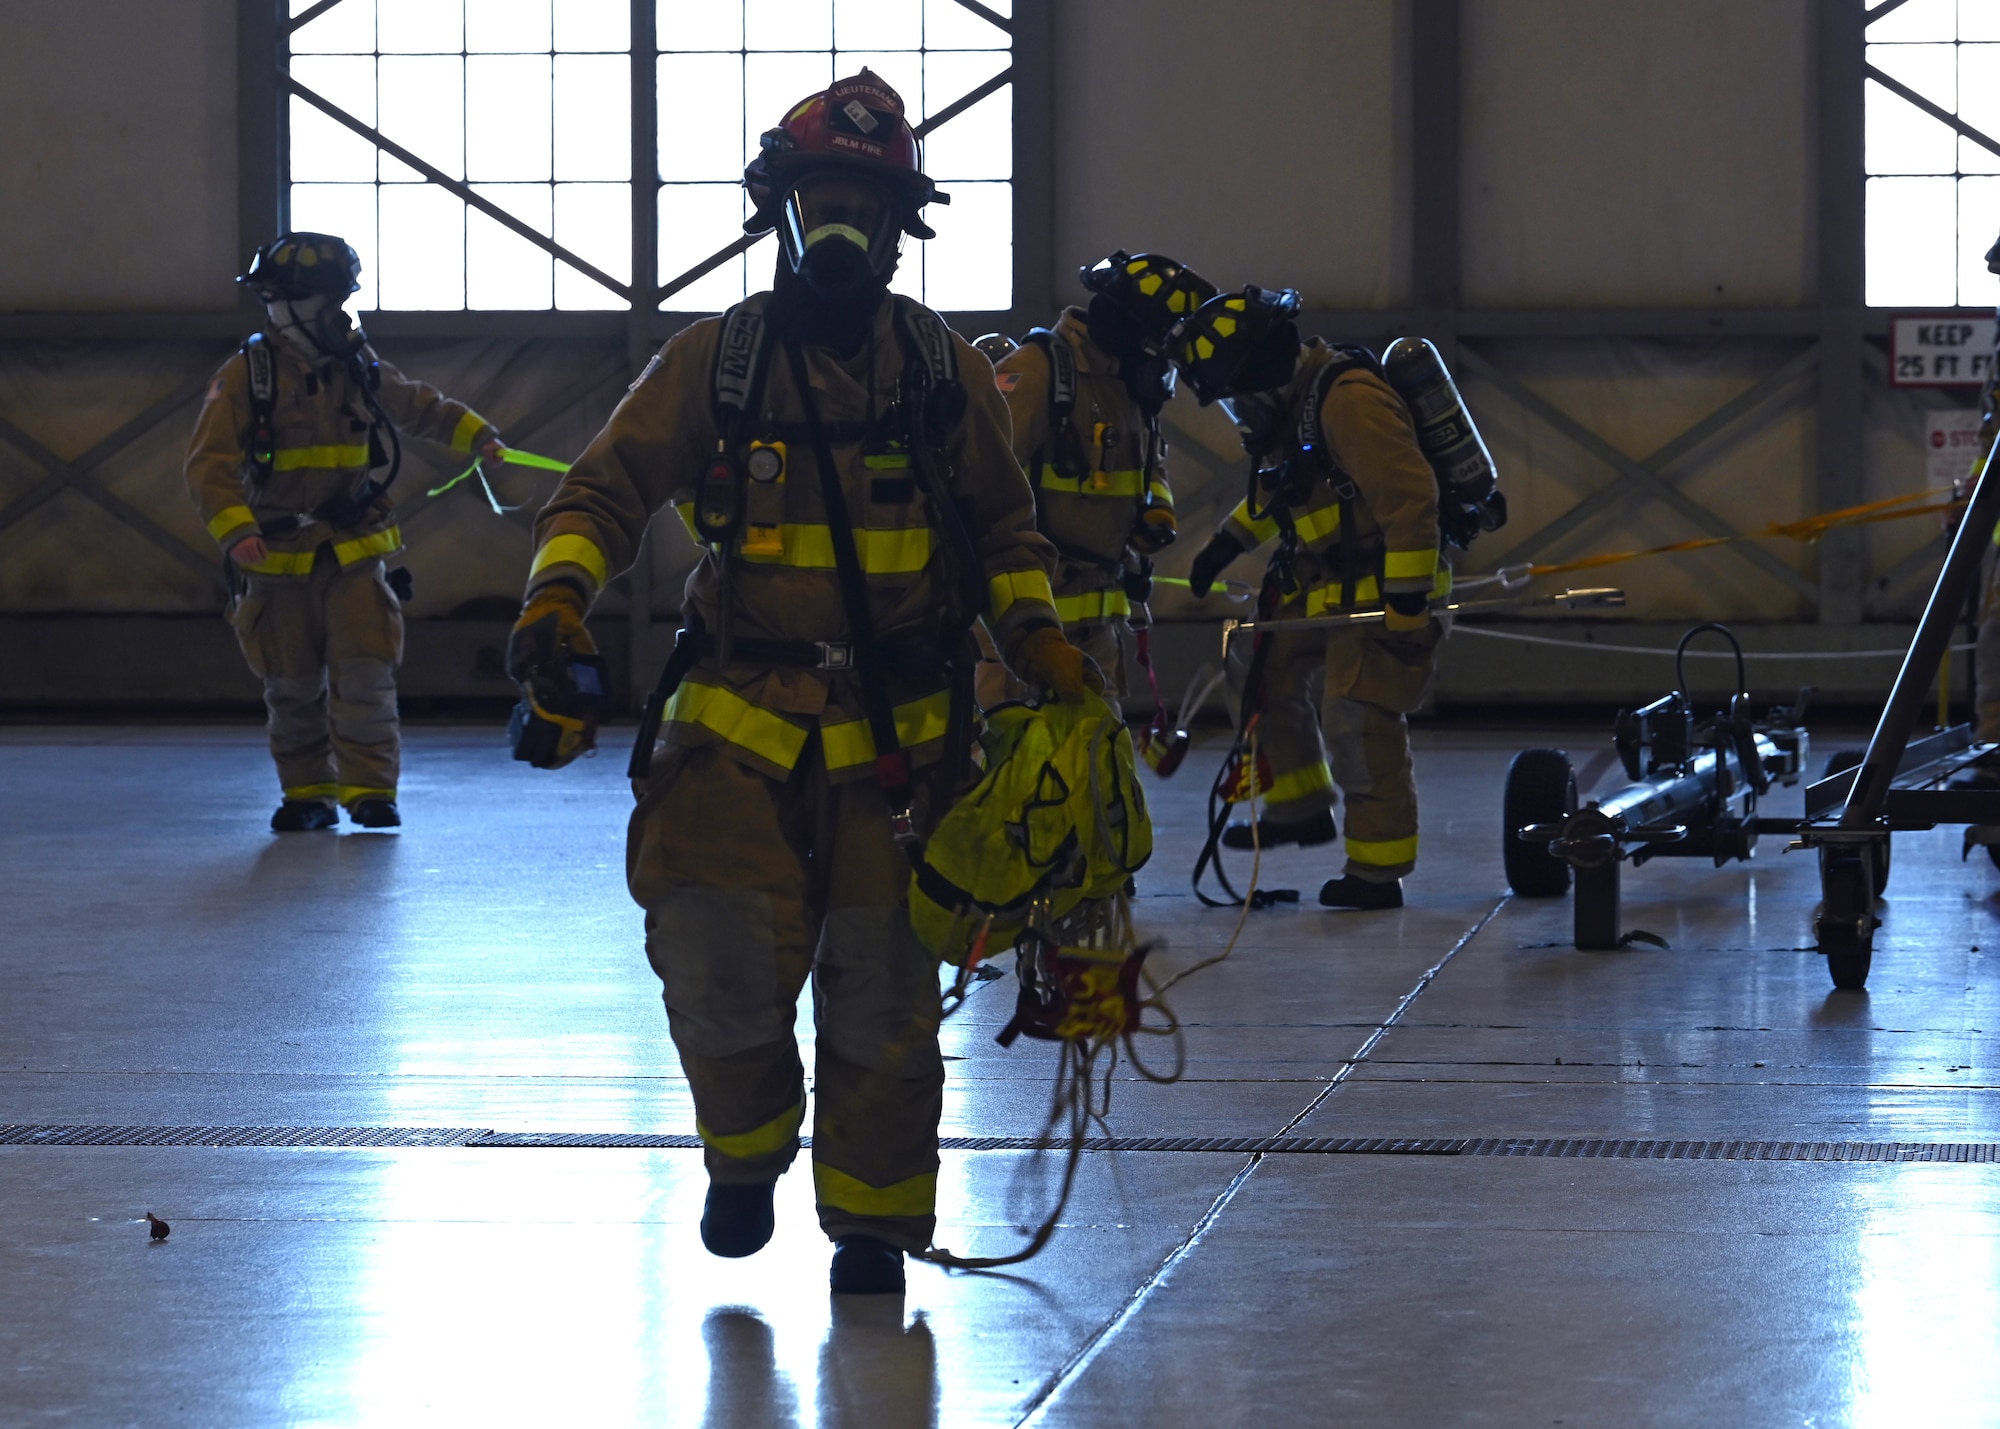 Lewis-McChord Fire and Emergency Services emergency responders participate in a simulated emergency at a hangar during Exercise Rainier War 21B at Joint Base Lewis-McChord, Washington, Nov. 8, 2021. Rainier War is a semi-annual, large readiness exercise led by 62nd Airlift Wing, designed to train Airmen under realistic scenarios that support a full spectrum readiness operations against modern threats and replicate today’s contingency operations.  (U.S. Air Force photo by Senior Airman Zoe Thacker)